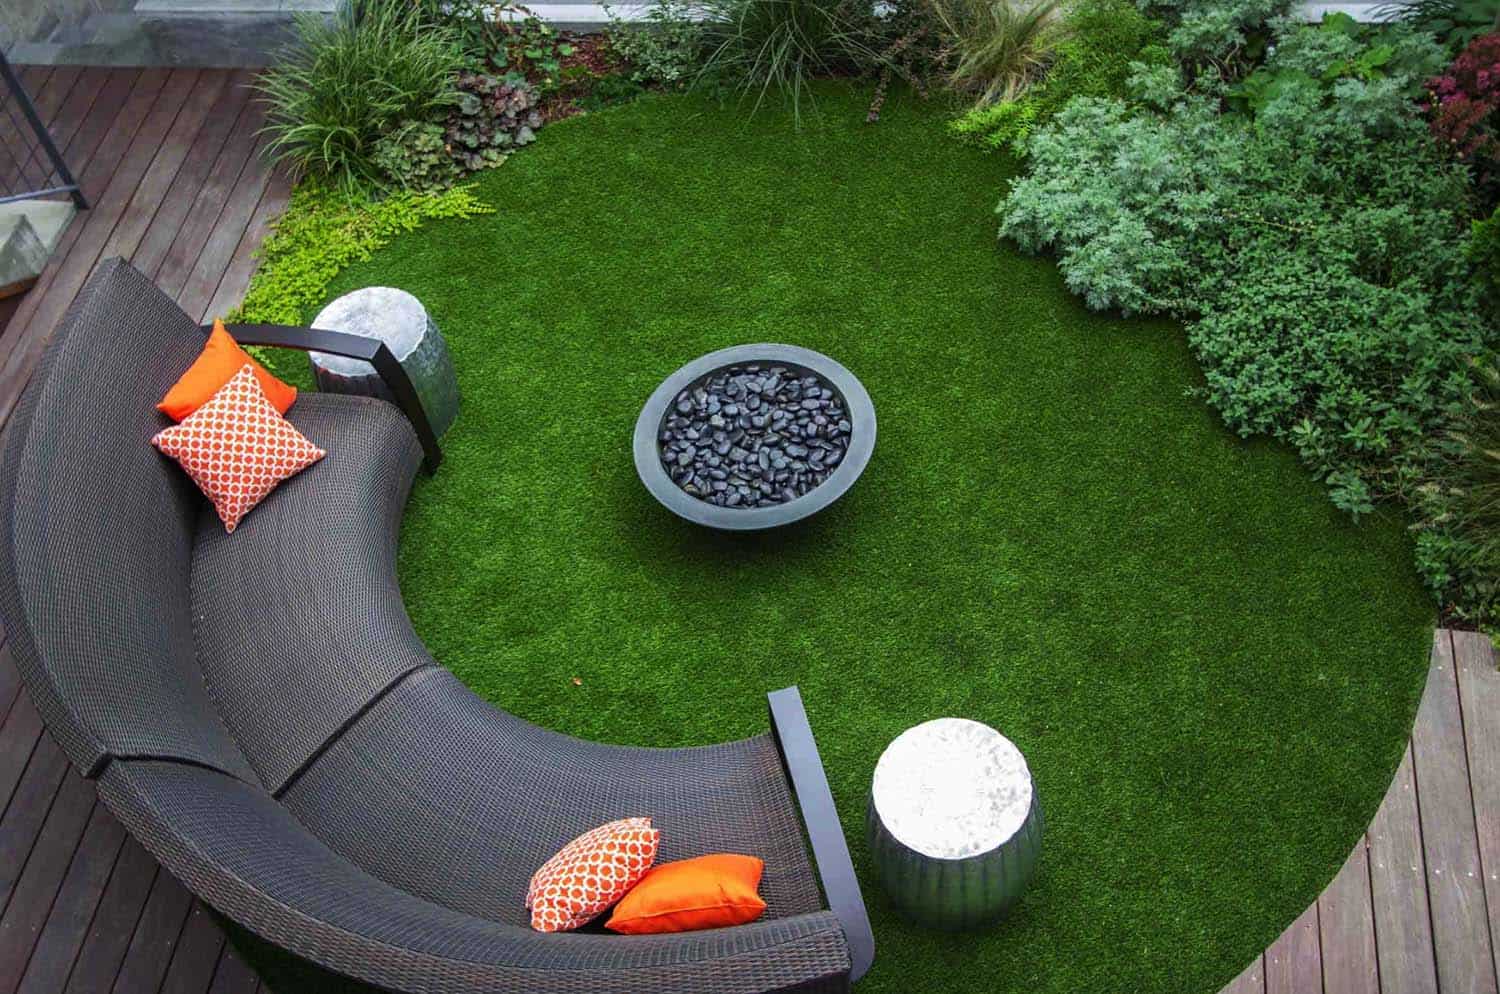 28 Inspiring Fire Pit Ideas To Create A, How To Put A Fire Pit On Grass